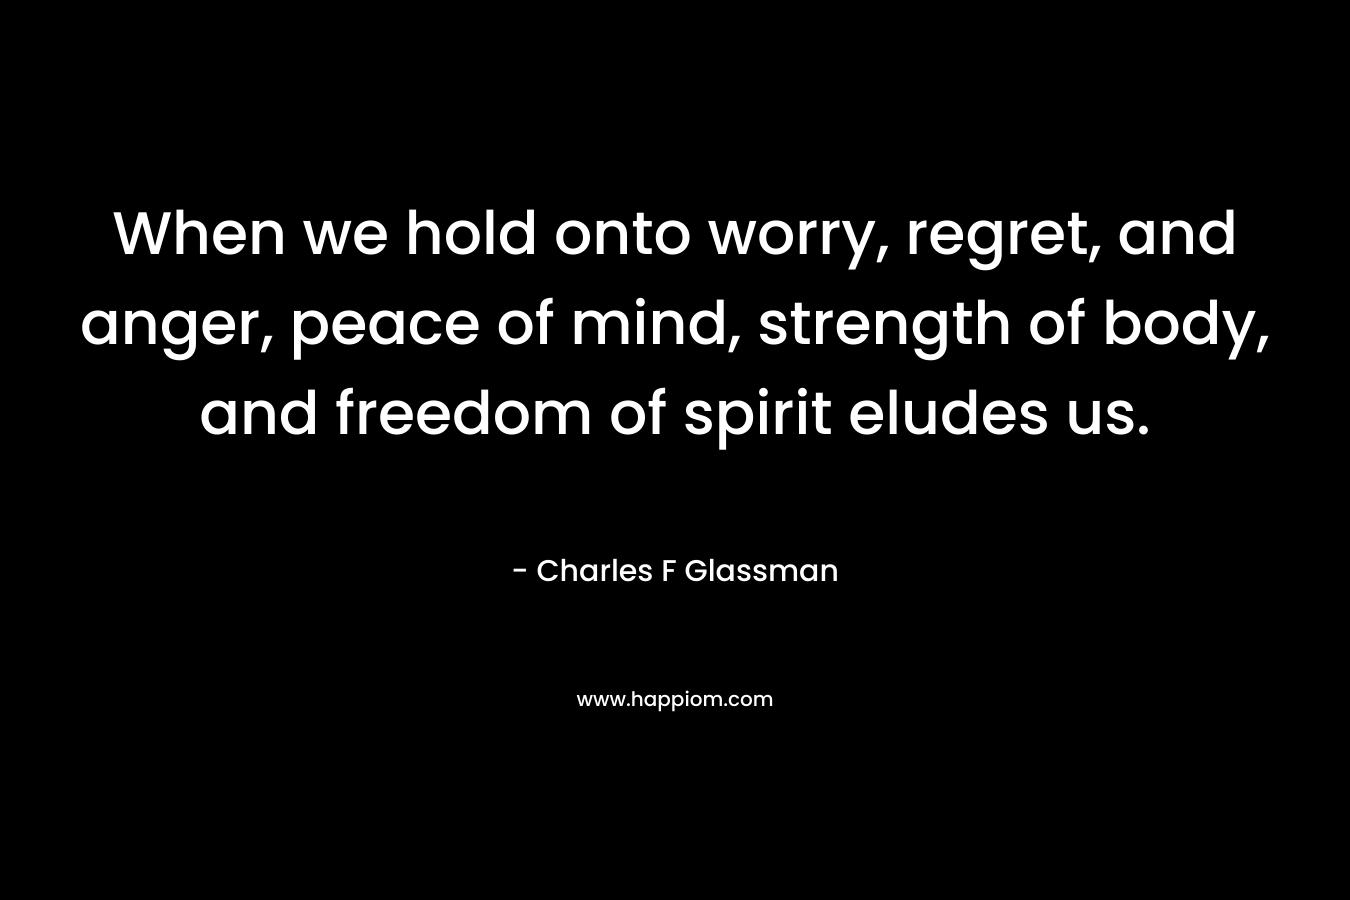 When we hold onto worry, regret, and anger, peace of mind, strength of body, and freedom of spirit eludes us. – Charles F Glassman